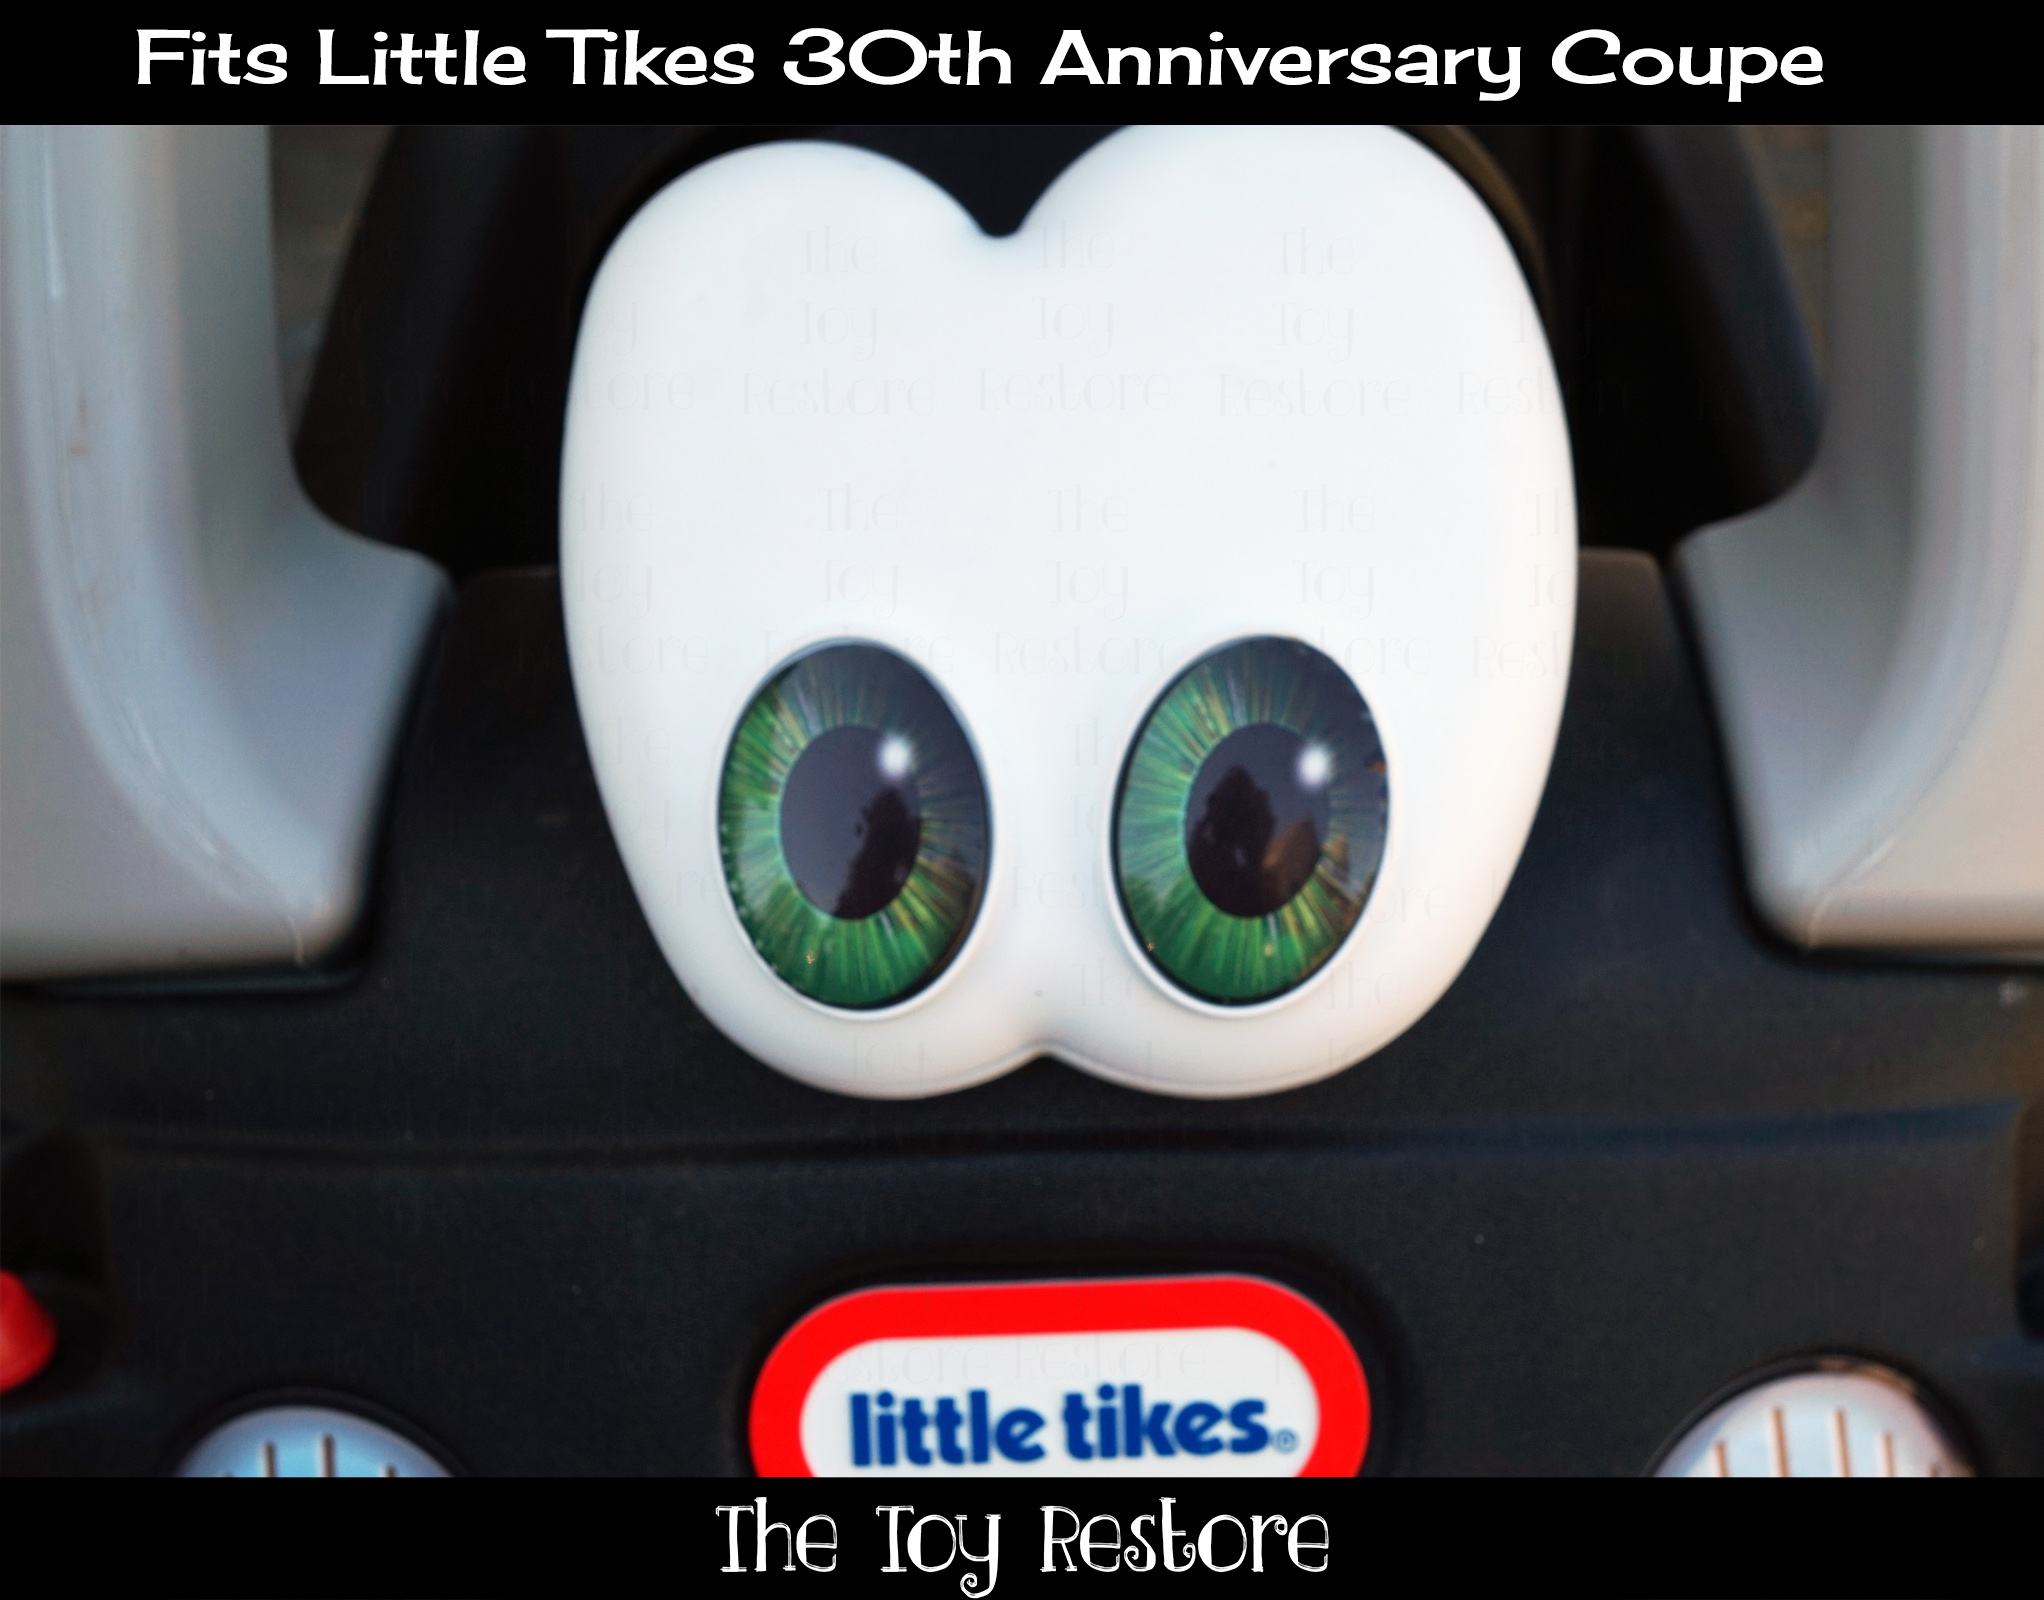 Customize Your Childs Little Tikes 30th Anniversary Coupe with Eye Color green